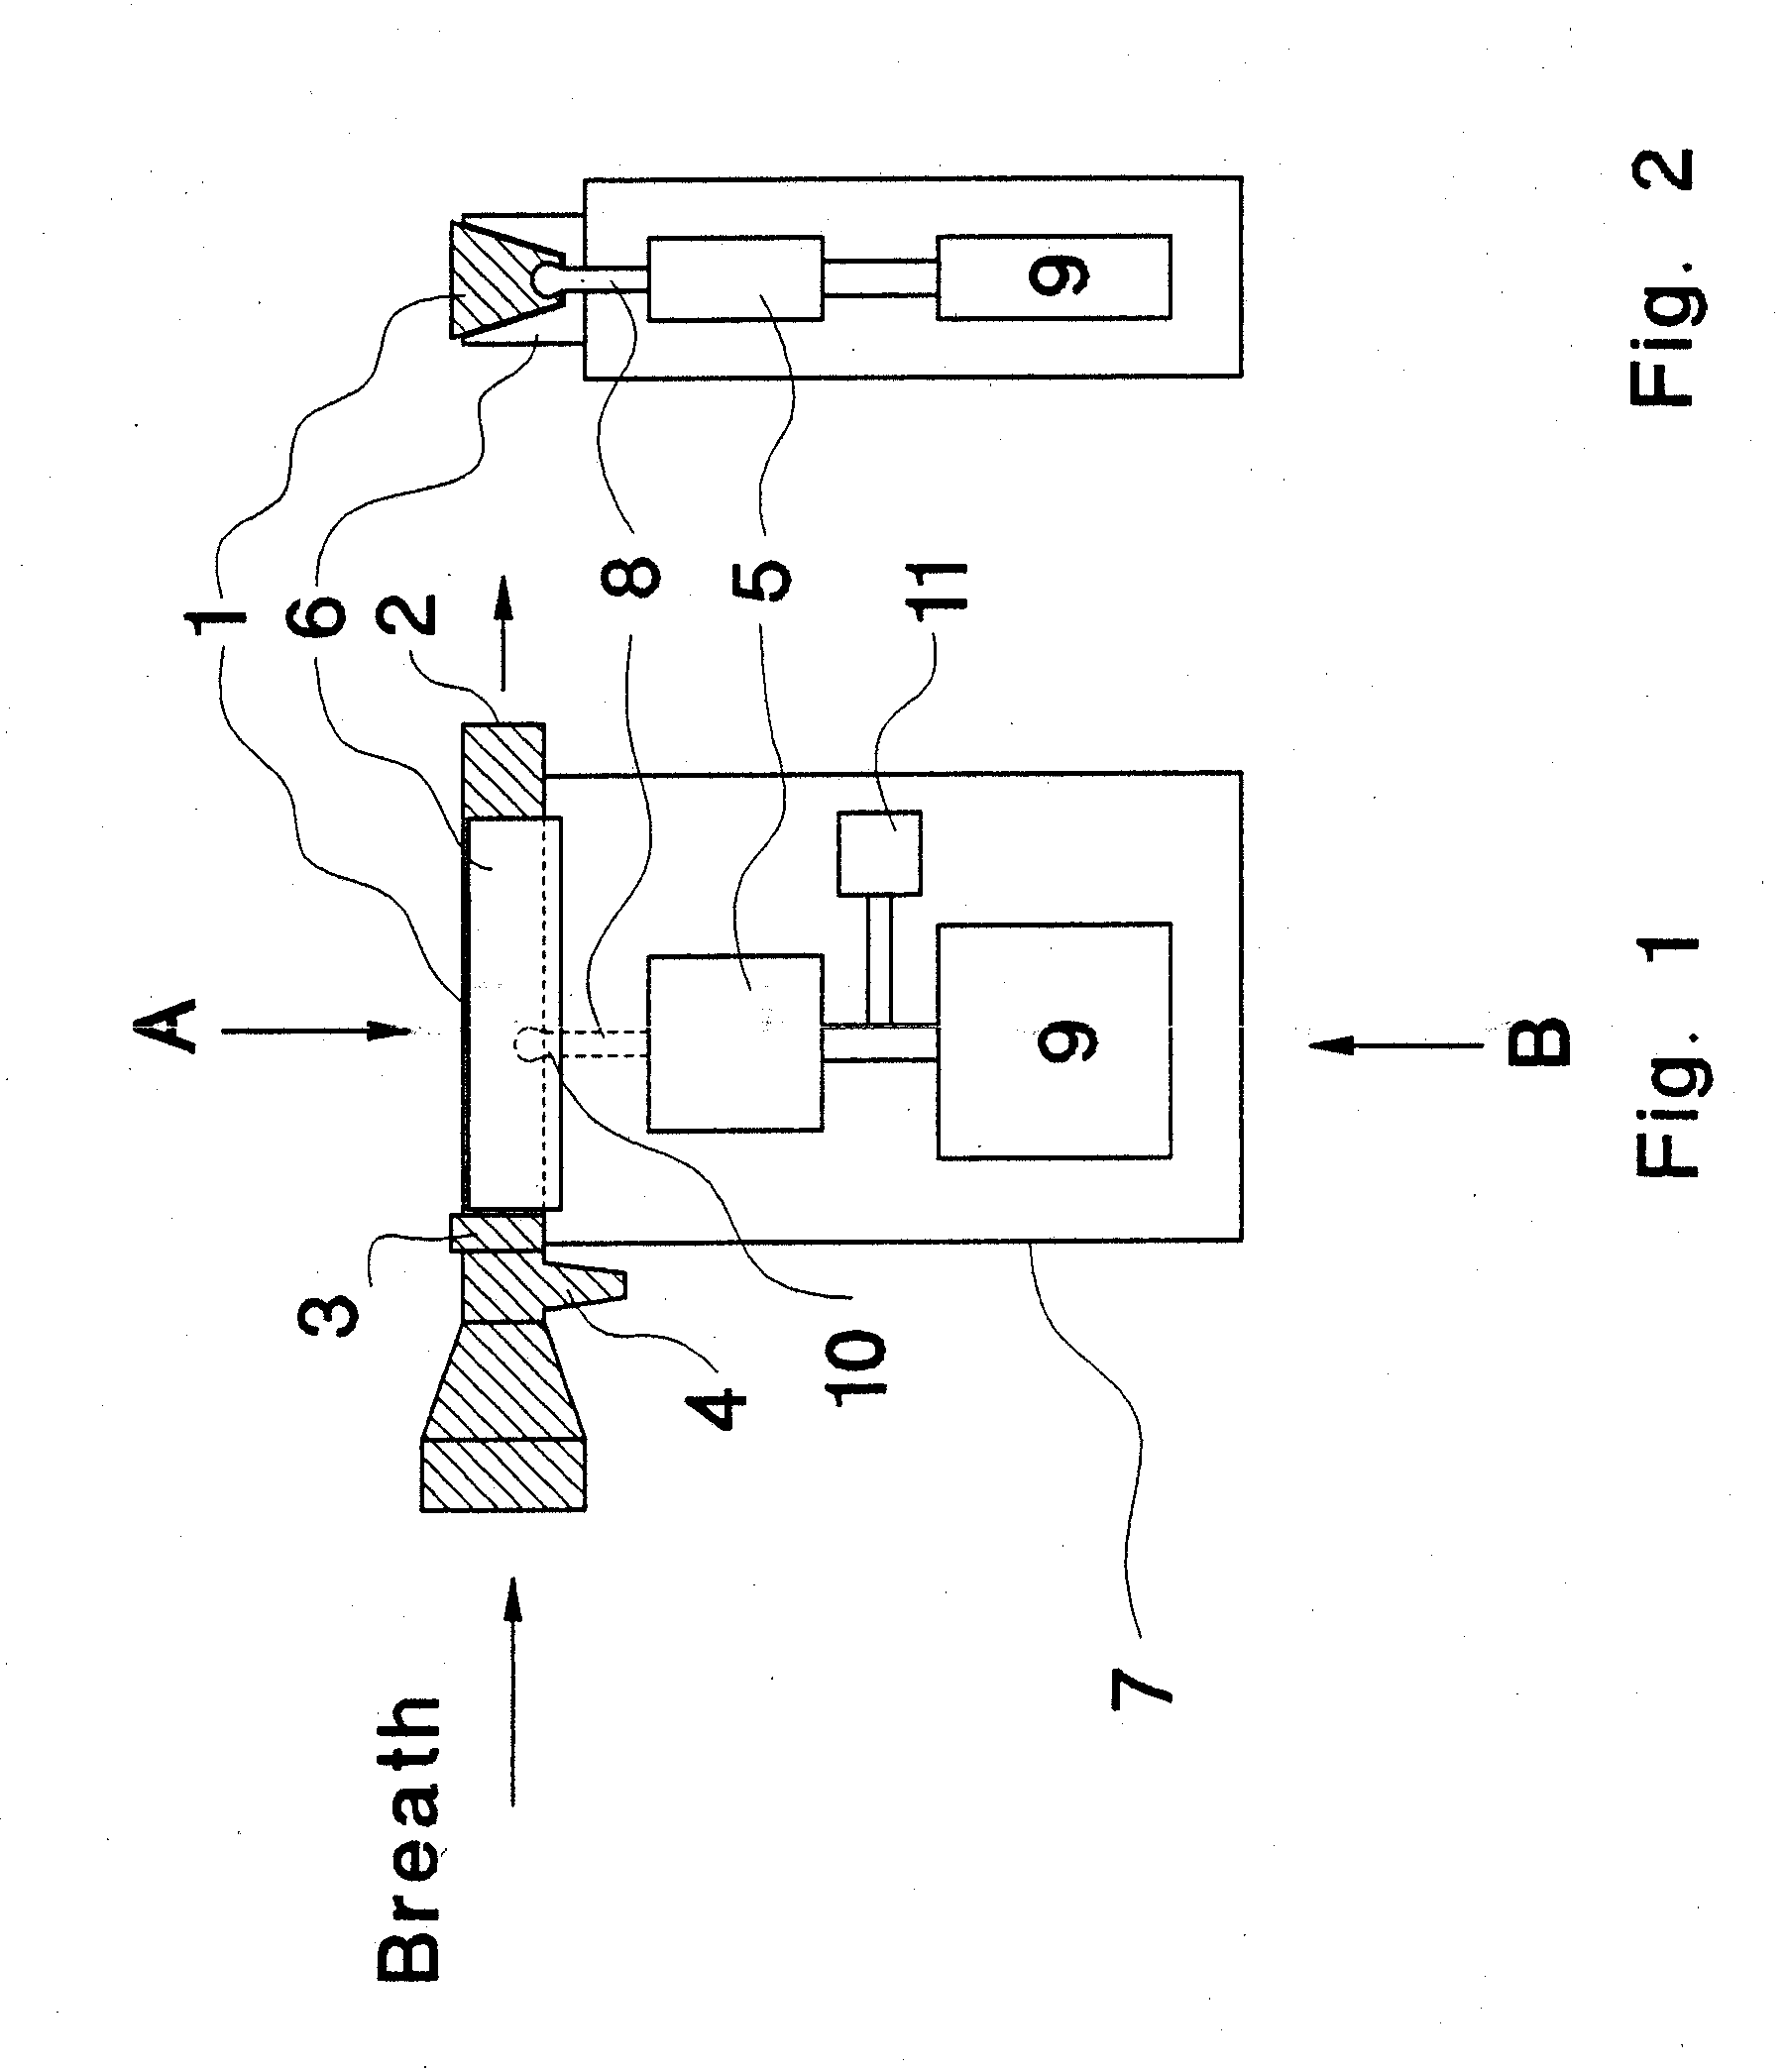 Breath alcohol measuring device with improved mouthpiece